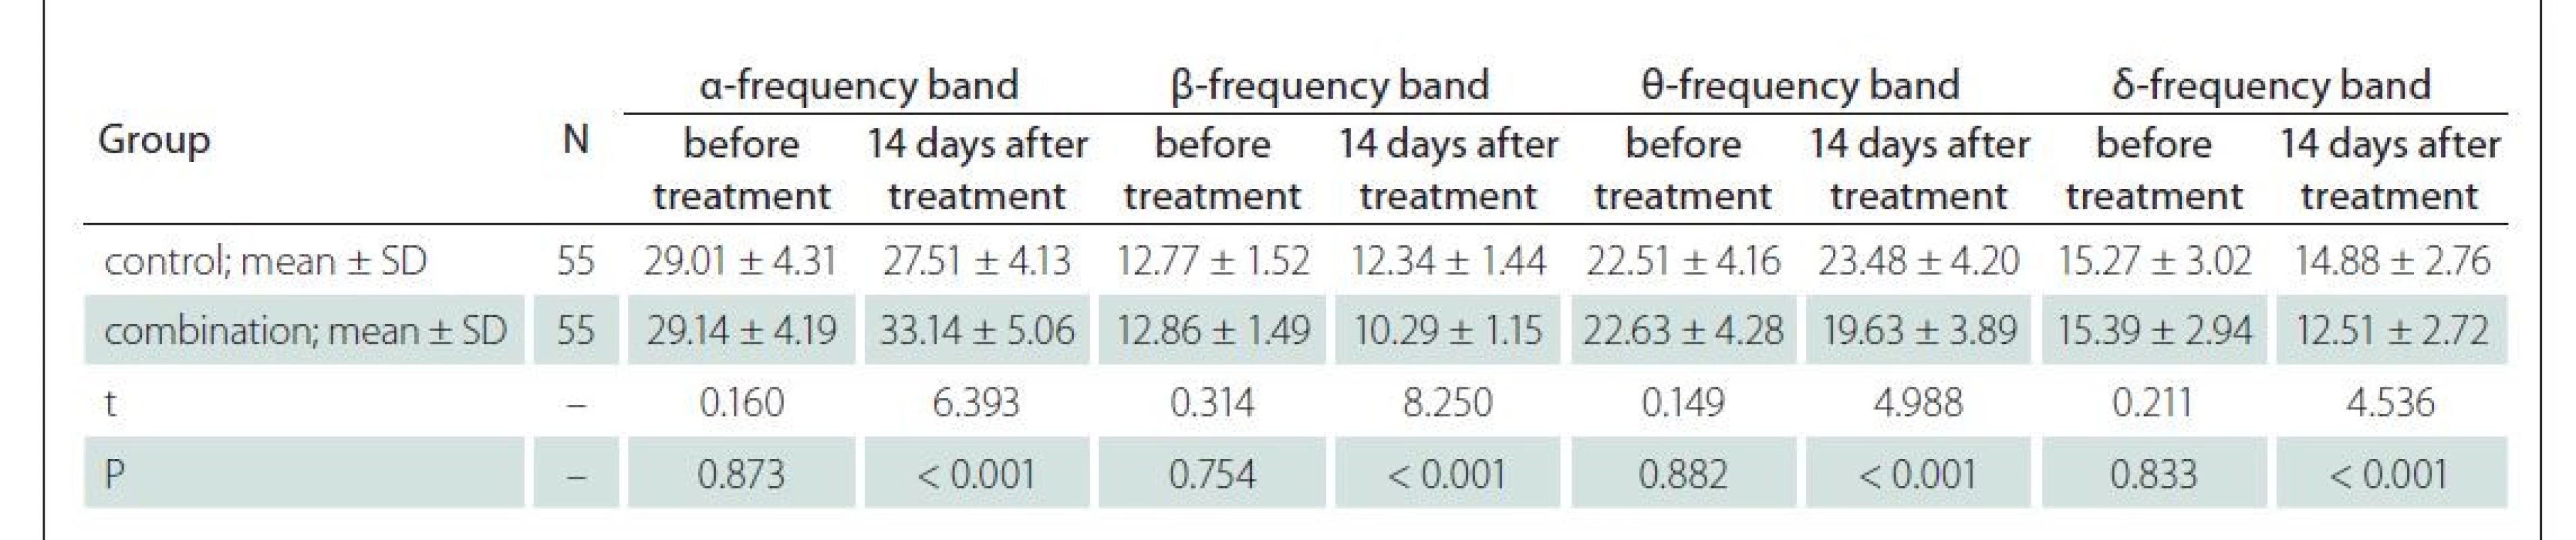 Relative powers of EEG frequency bands.